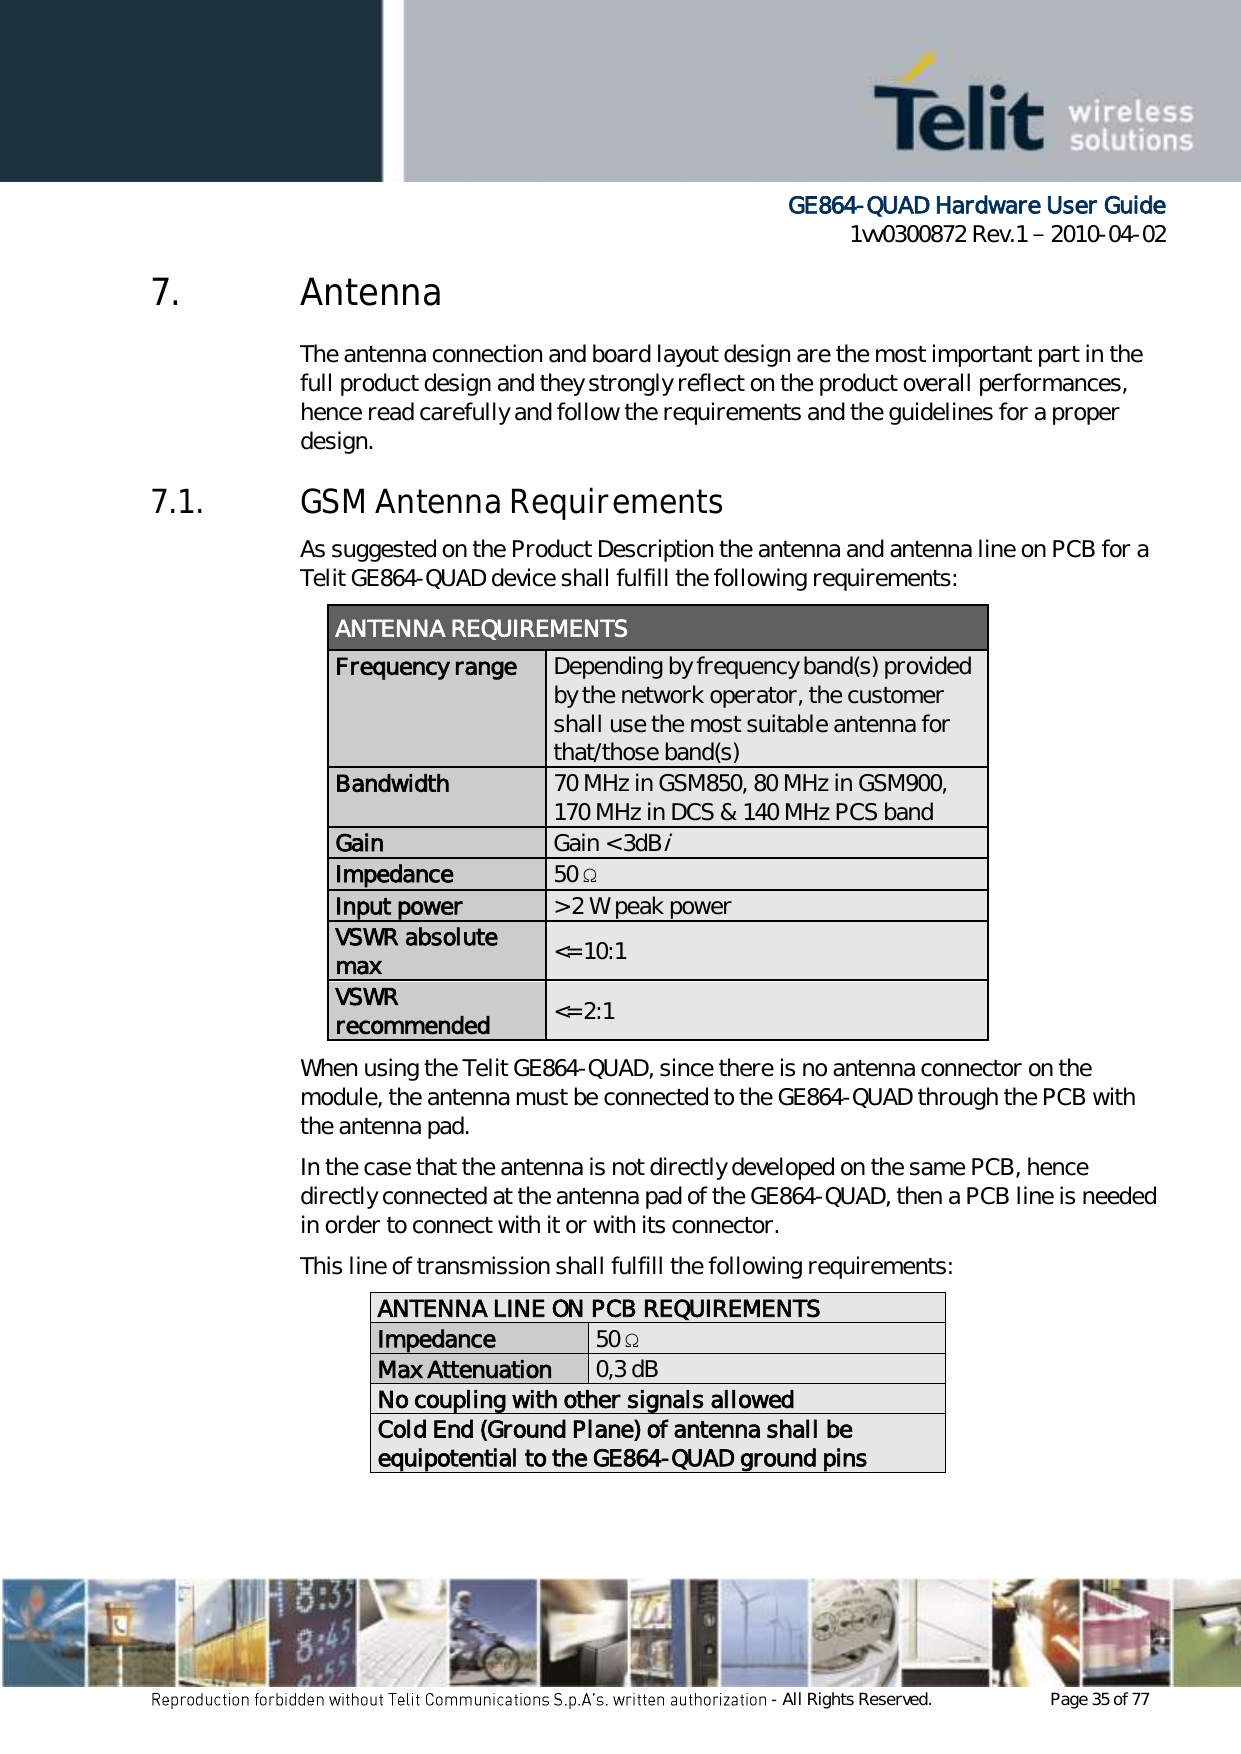      GE864-QUAD Hardware User Guide 1vv0300872 Rev.1   2010-04-02 - All Rights Reserved.    Page 35 of 77  7. Antenna The antenna connection and board layout design are the most important part in the full product design and they strongly reflect on the product overall performances, hence read carefully and follow the requirements and the guidelines for a proper design. 7.1. GSM Antenna Requirements As suggested on the Product Description the antenna and antenna line on PCB for a Telit GE864-QUAD device shall fulfill the following requirements: ANTENNA REQUIREMENTS Frequency range Depending by frequency band(s) provided by the network operator, the customer shall use the most suitable antenna for that/those band(s) Bandwidth 70 MHz in GSM850, 80 MHz in GSM900, 170 MHz in DCS &amp; 140 MHz PCS band Gain Gain &lt; 3dBi Impedance 50 Ω Input power &gt; 2 W peak power VSWR absolute max &lt;= 10:1 VSWR recommended &lt;= 2:1 When using the Telit GE864-QUAD, since there is no antenna connector on the module, the antenna must be connected to the GE864-QUAD through the PCB with the antenna pad. In the case that the antenna is not directly developed on the same PCB, hence directly connected at the antenna pad of the GE864-QUAD, then a PCB line is needed in order to connect with it or with its connector. This line of transmission shall fulfill the following requirements: ANTENNA LINE ON PCB REQUIREMENTS Impedance 50 Ω Max Attenuation 0,3 dB No coupling with other signals allowed Cold End (Ground Plane) of antenna shall be equipotential to the GE864-QUAD ground pins 